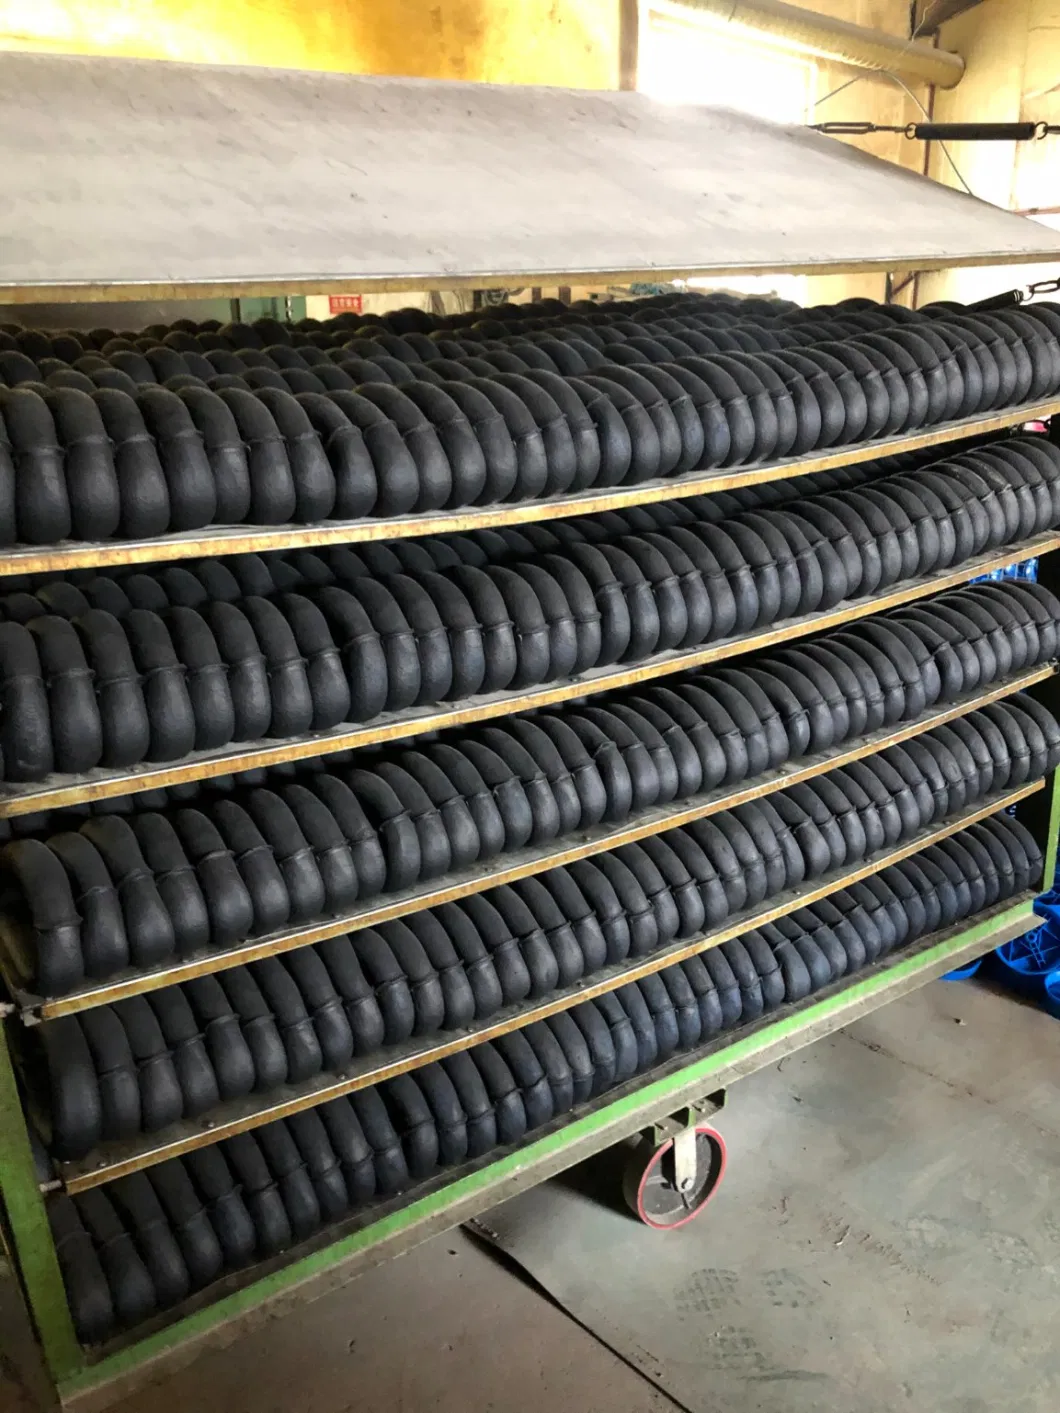 ATV Tubeless Tires/All Terrain Vehicle Tubeless Tires 13X5.00-6 Rubber Wheels Agricultural Machinery Wheels Tractor Tires